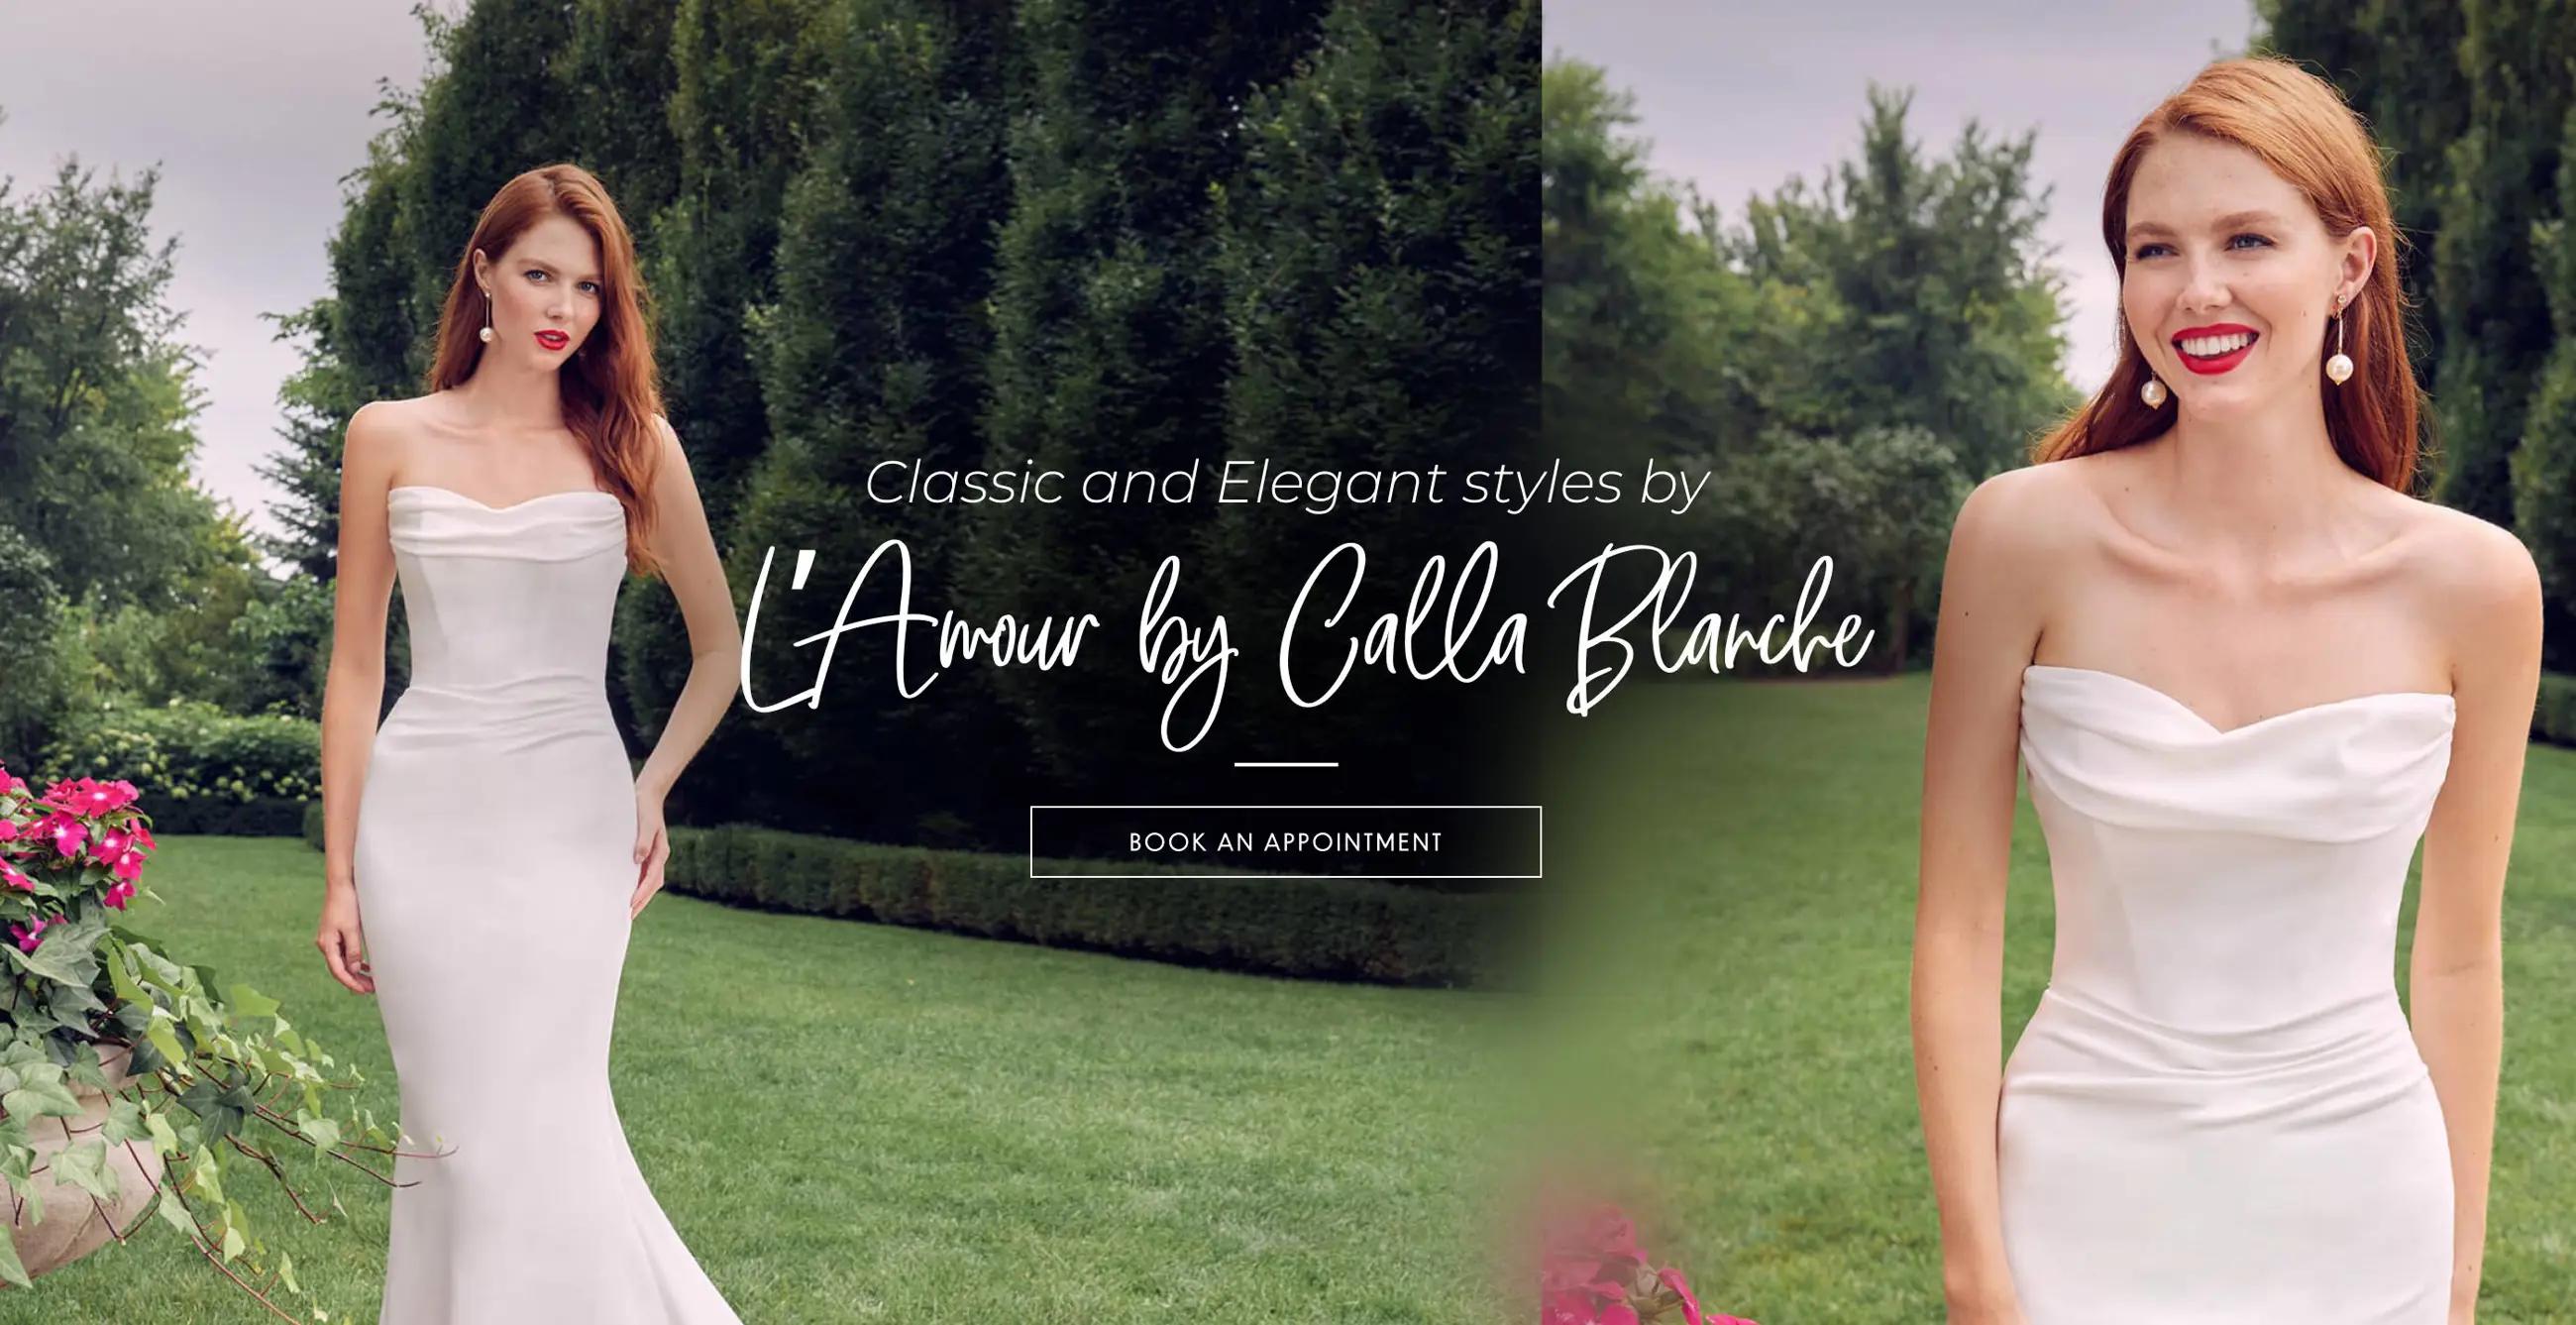 L'Amour by Calla Blanche wedding dresses at Liliana Bridal House